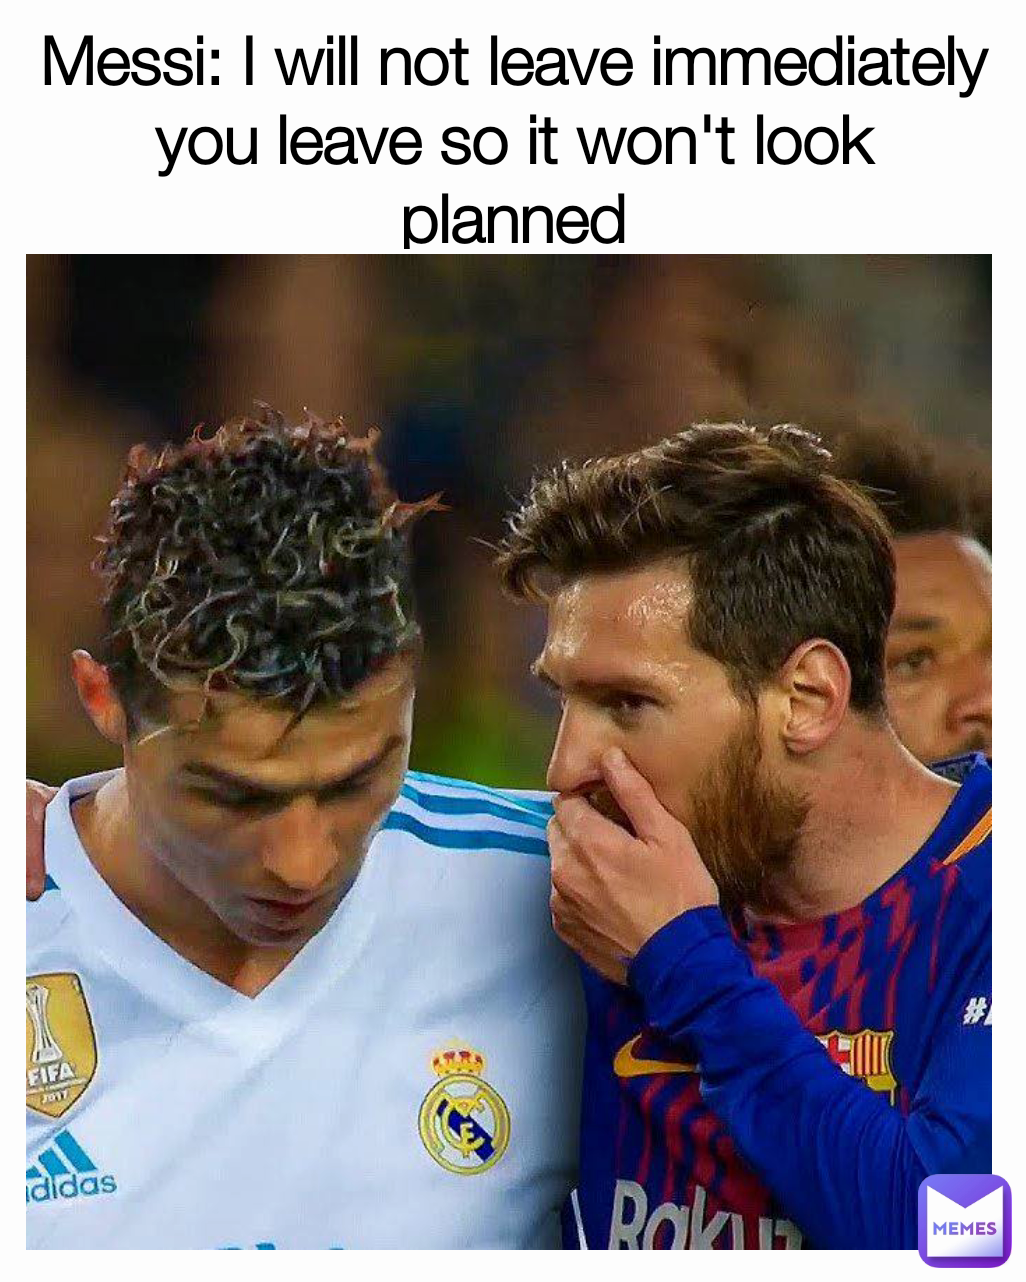 Messi: I will not leave immediately you leave so it won't look planned
